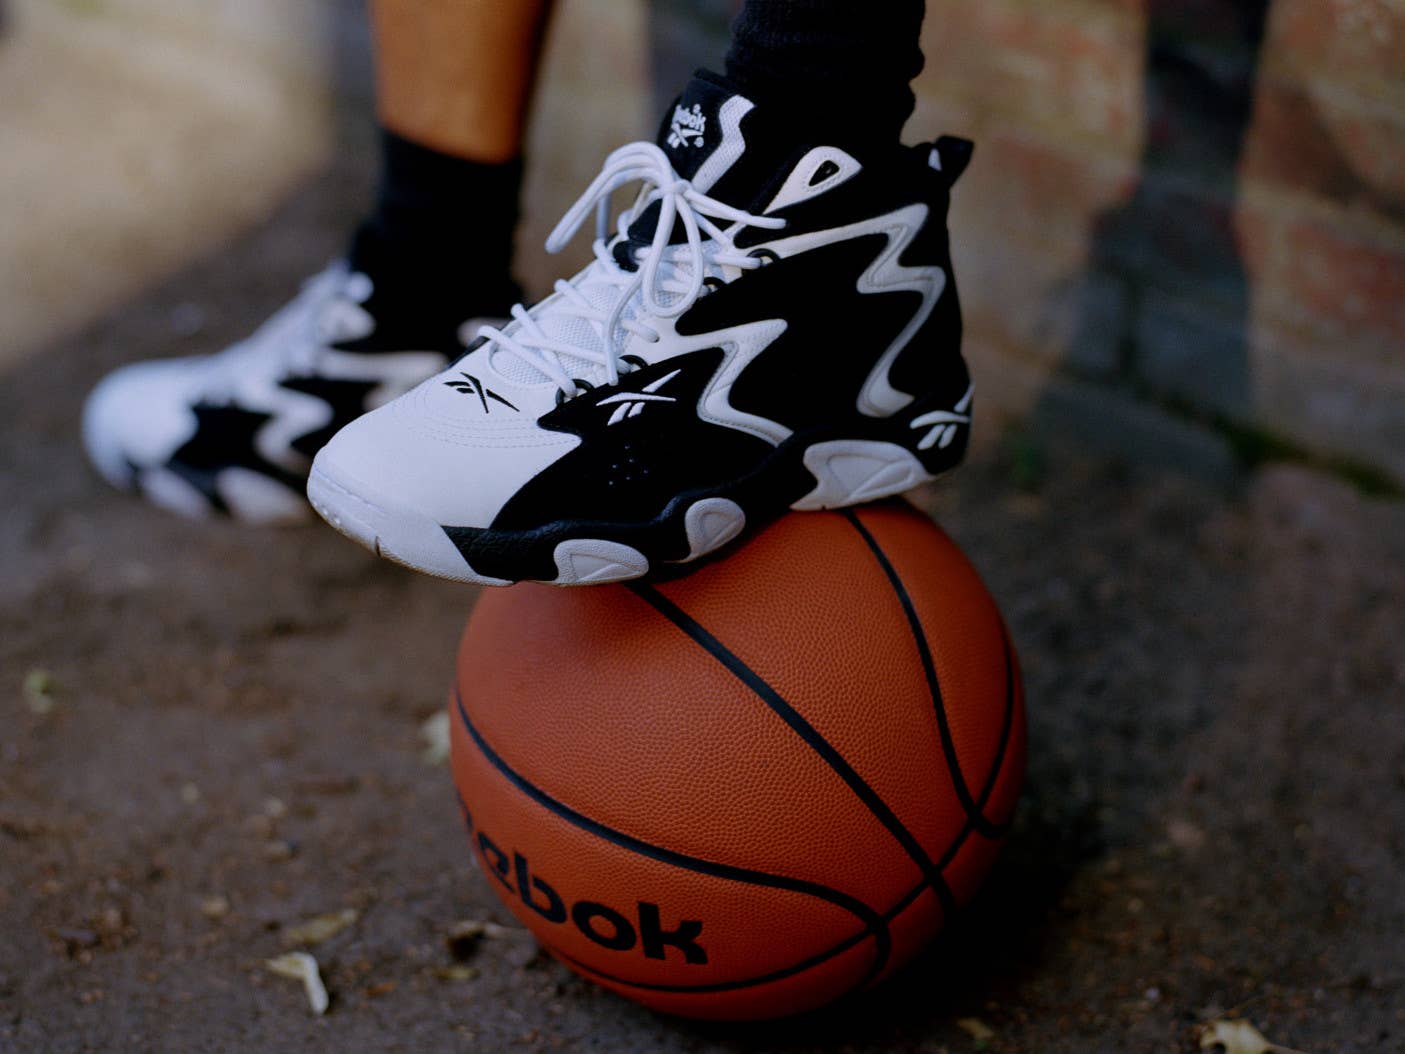 Reebok's New Sneaker Is Inspired by '90s New York Basketball